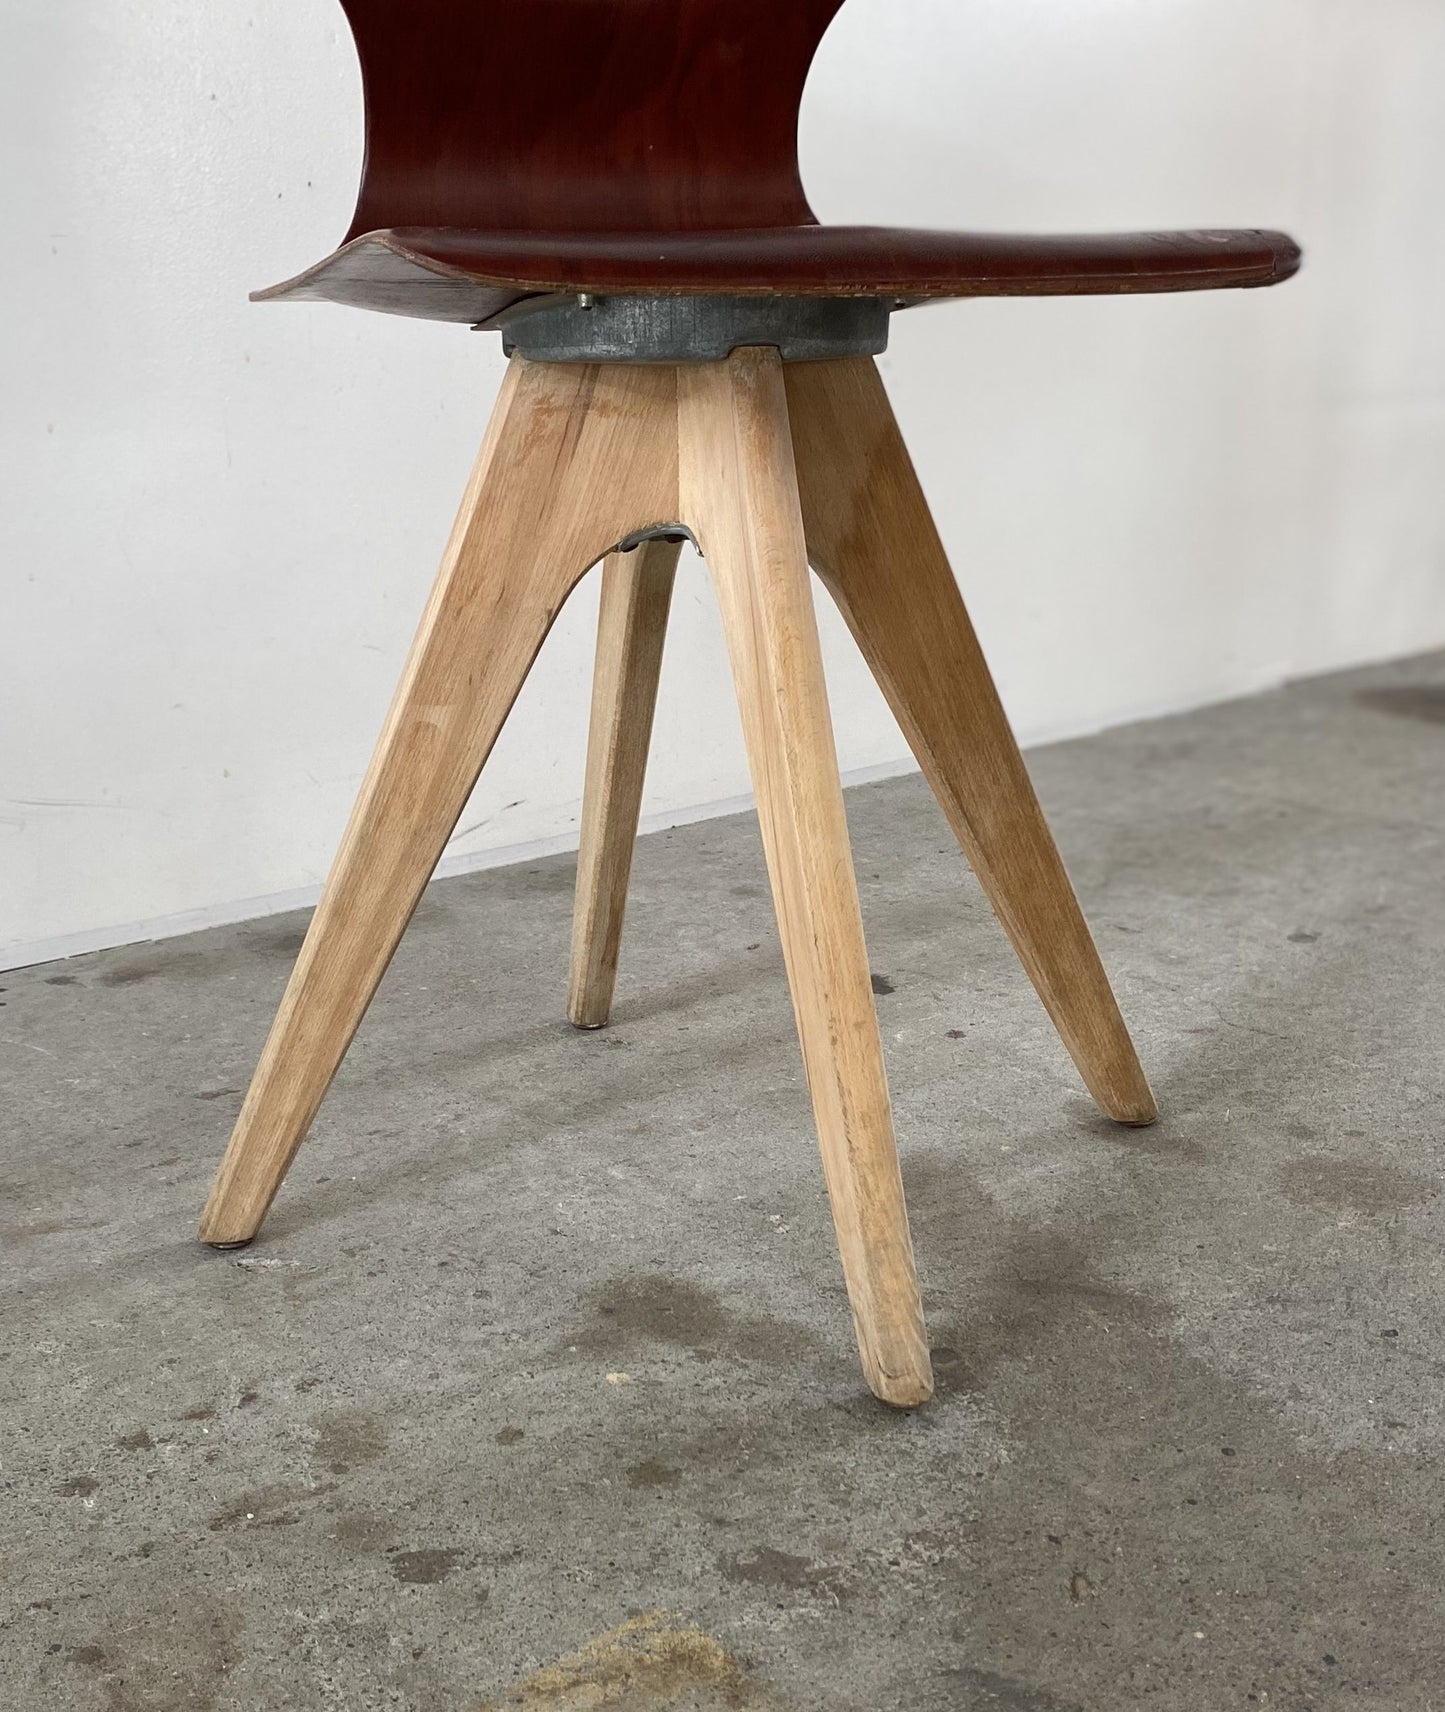 Vintage Ply wood Chair "FPF FLOTOTTO"